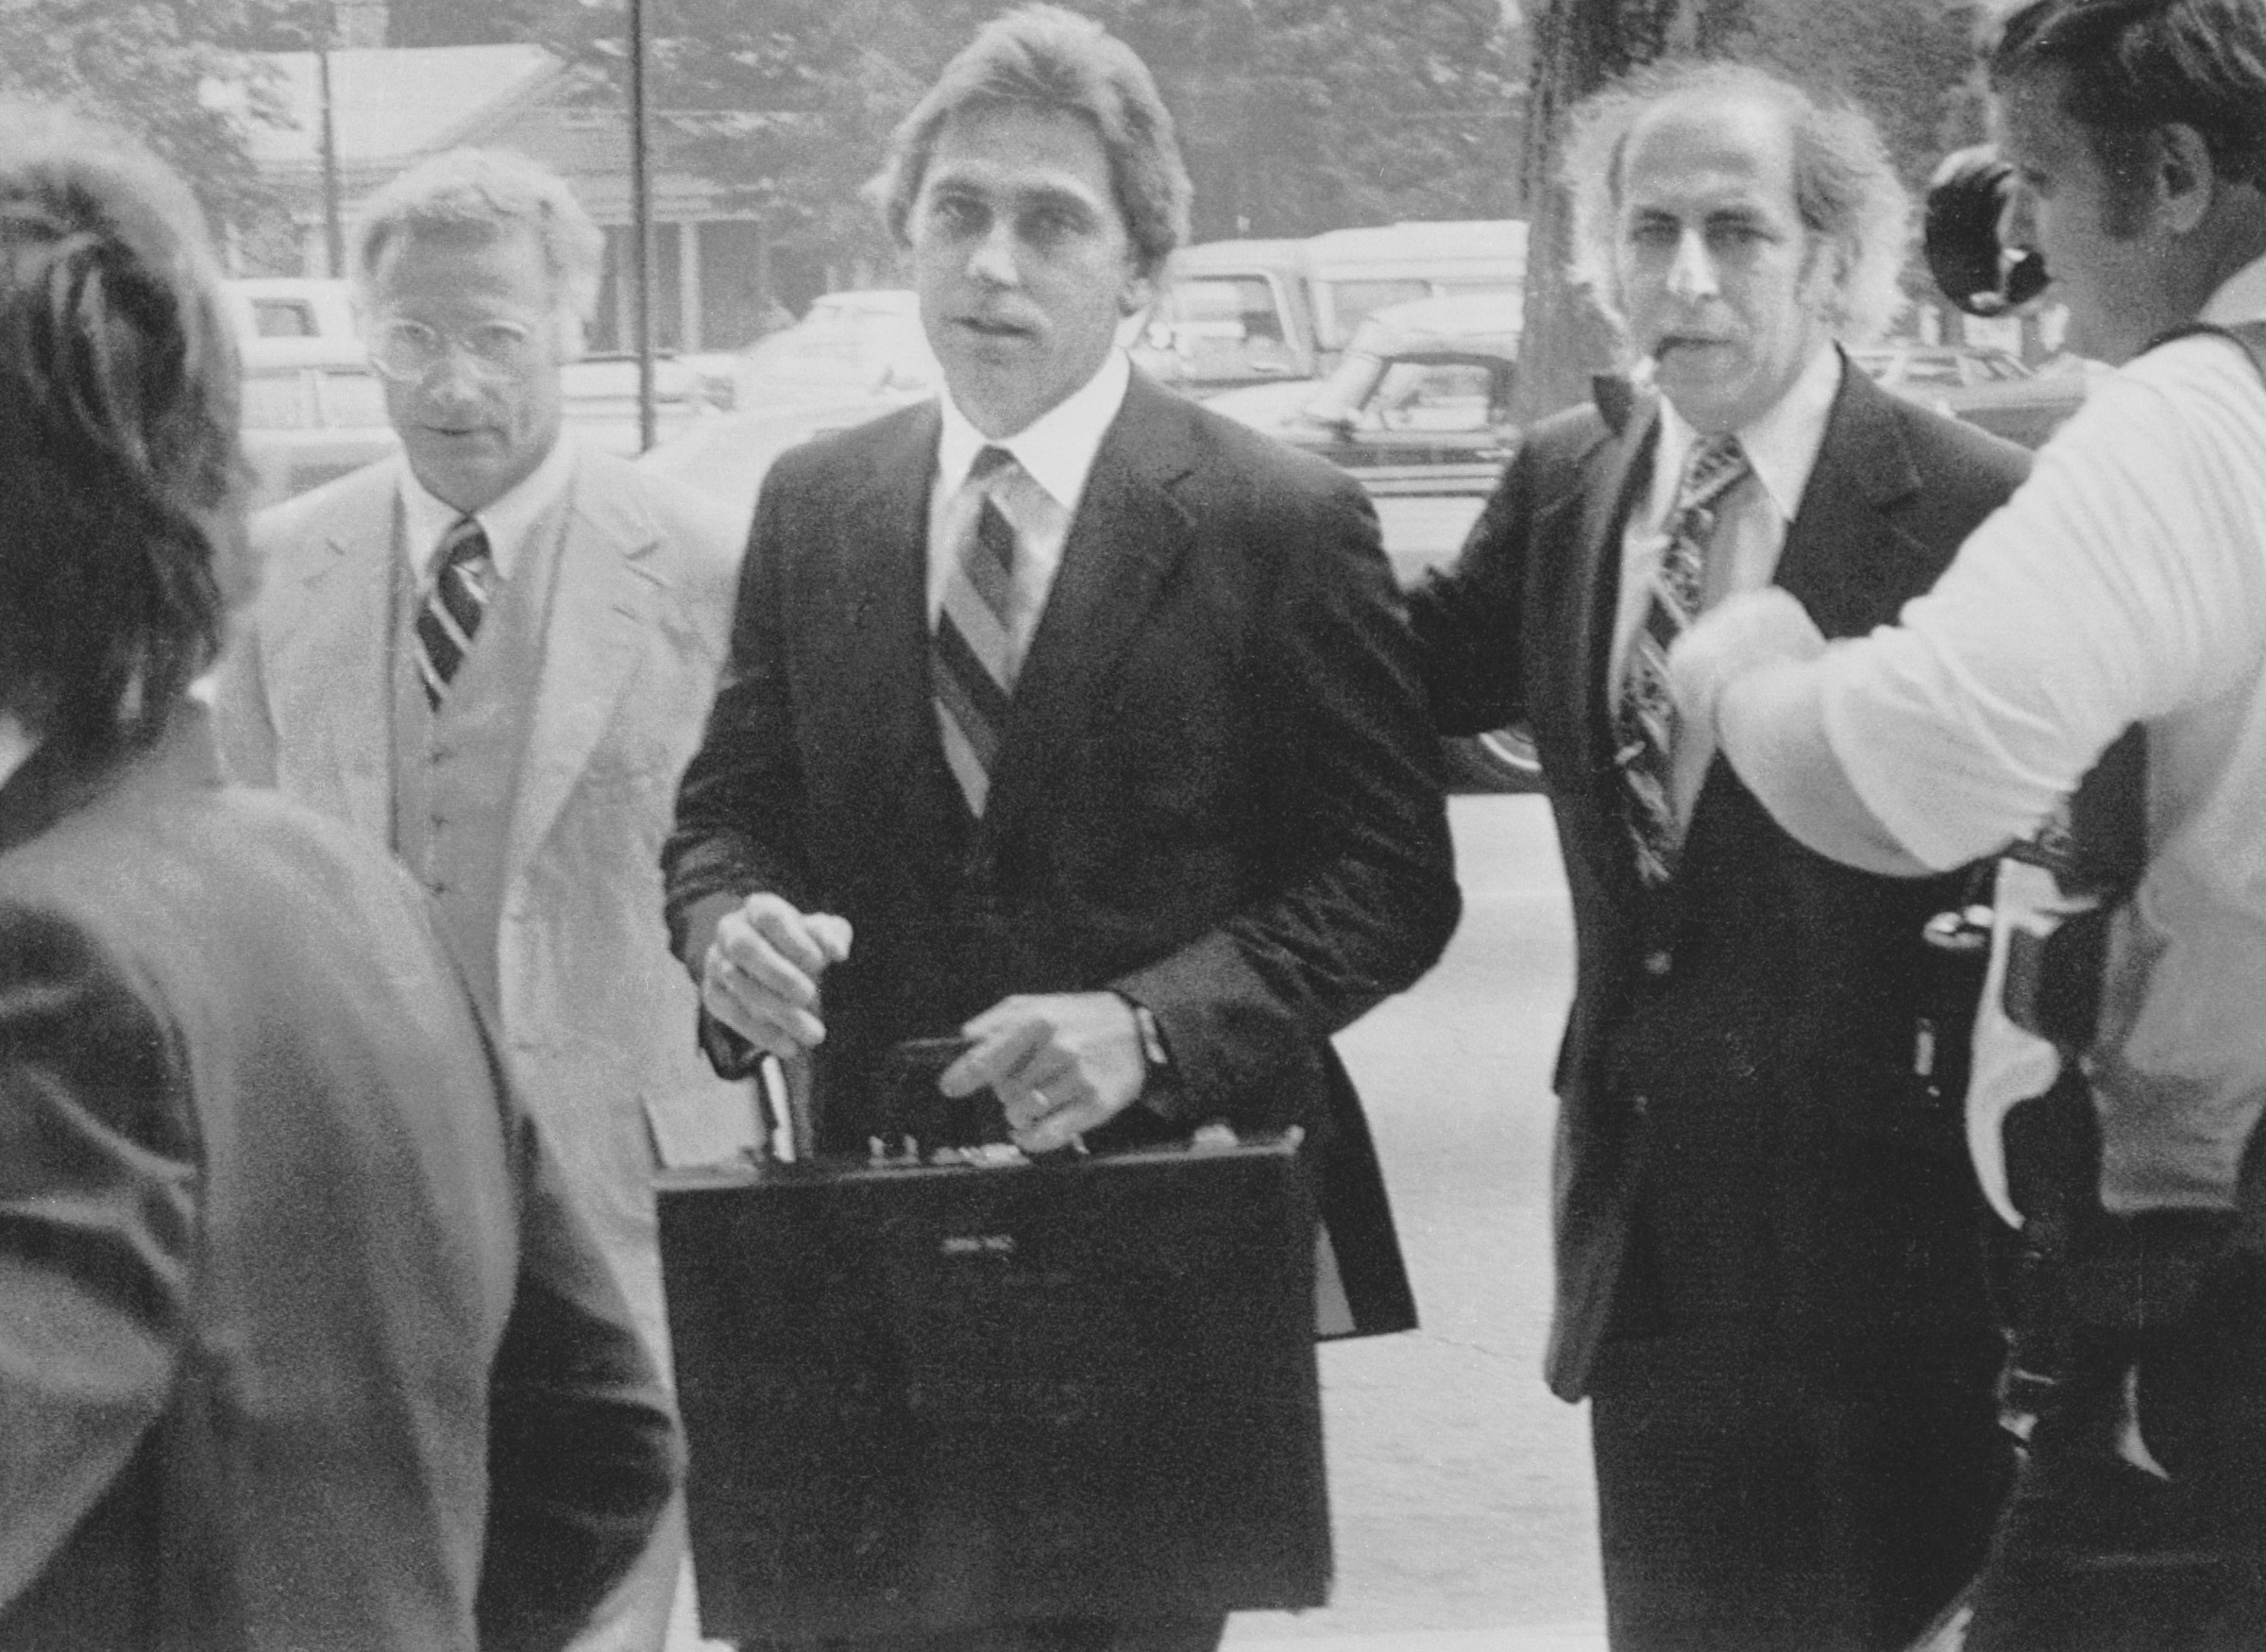 16 Jul 1979, Raleigh, North Carolina, USA --- Original caption: July 16, 1979 - Raleigh, North Carolina: Dr. Jeffrey MacDonald (center), nine and a half years after his pregnant wife and two young daughters were killed in a Fort Bragg, North Carolina apartment, entered the Federal Courthouse to stand trial for their deaths. With him are attorneys Wade Smith (left) and Bernard Segal (right). The former Army doctor told newsmen he believes he will be found innocent. The trial was expected to last six to eight weeks. --- Image by © Bettmann/CORBIS